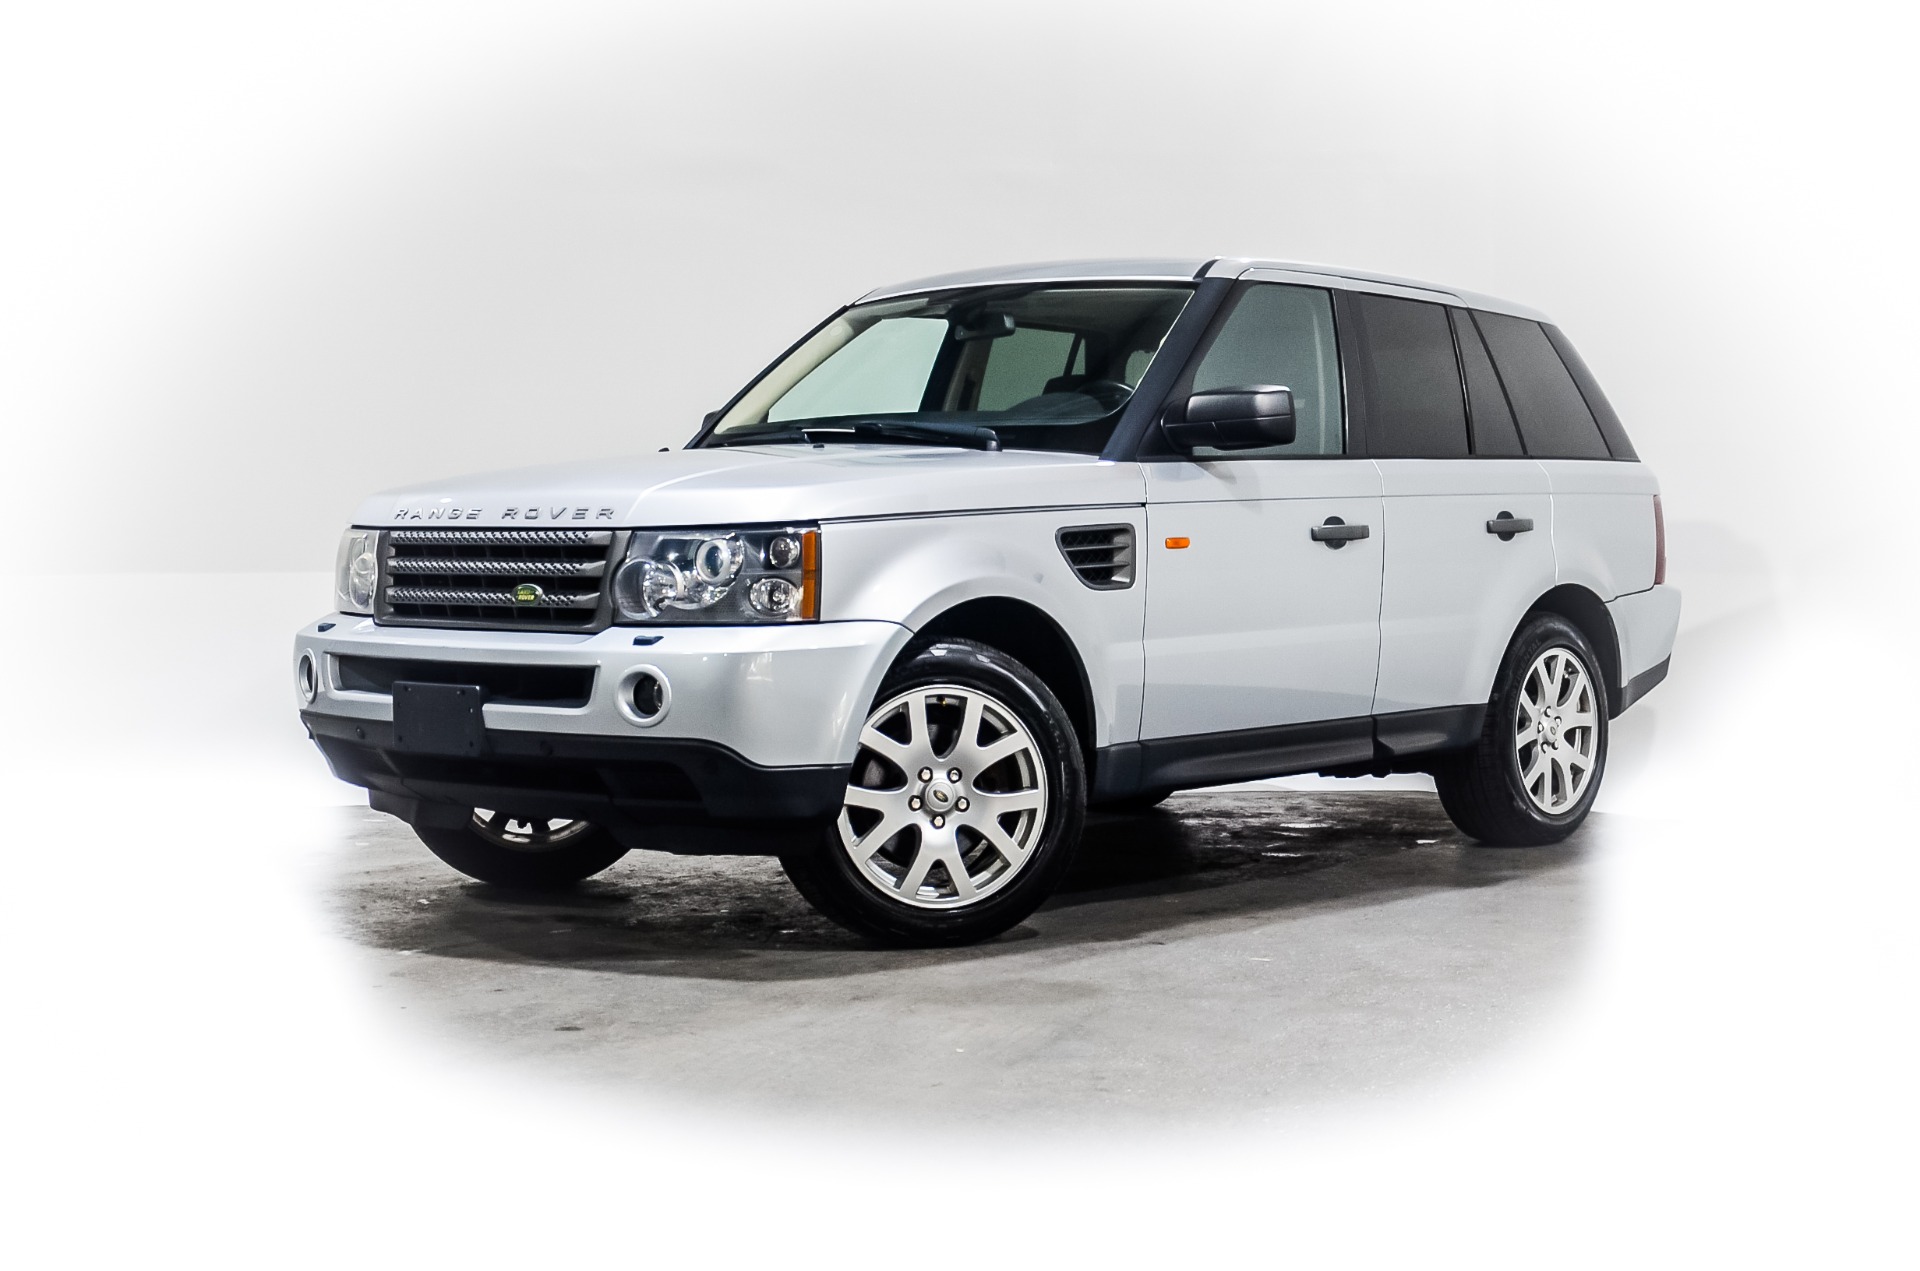 2008 Land Rover Range Rover Sport HSE in Silver - Gear shifter